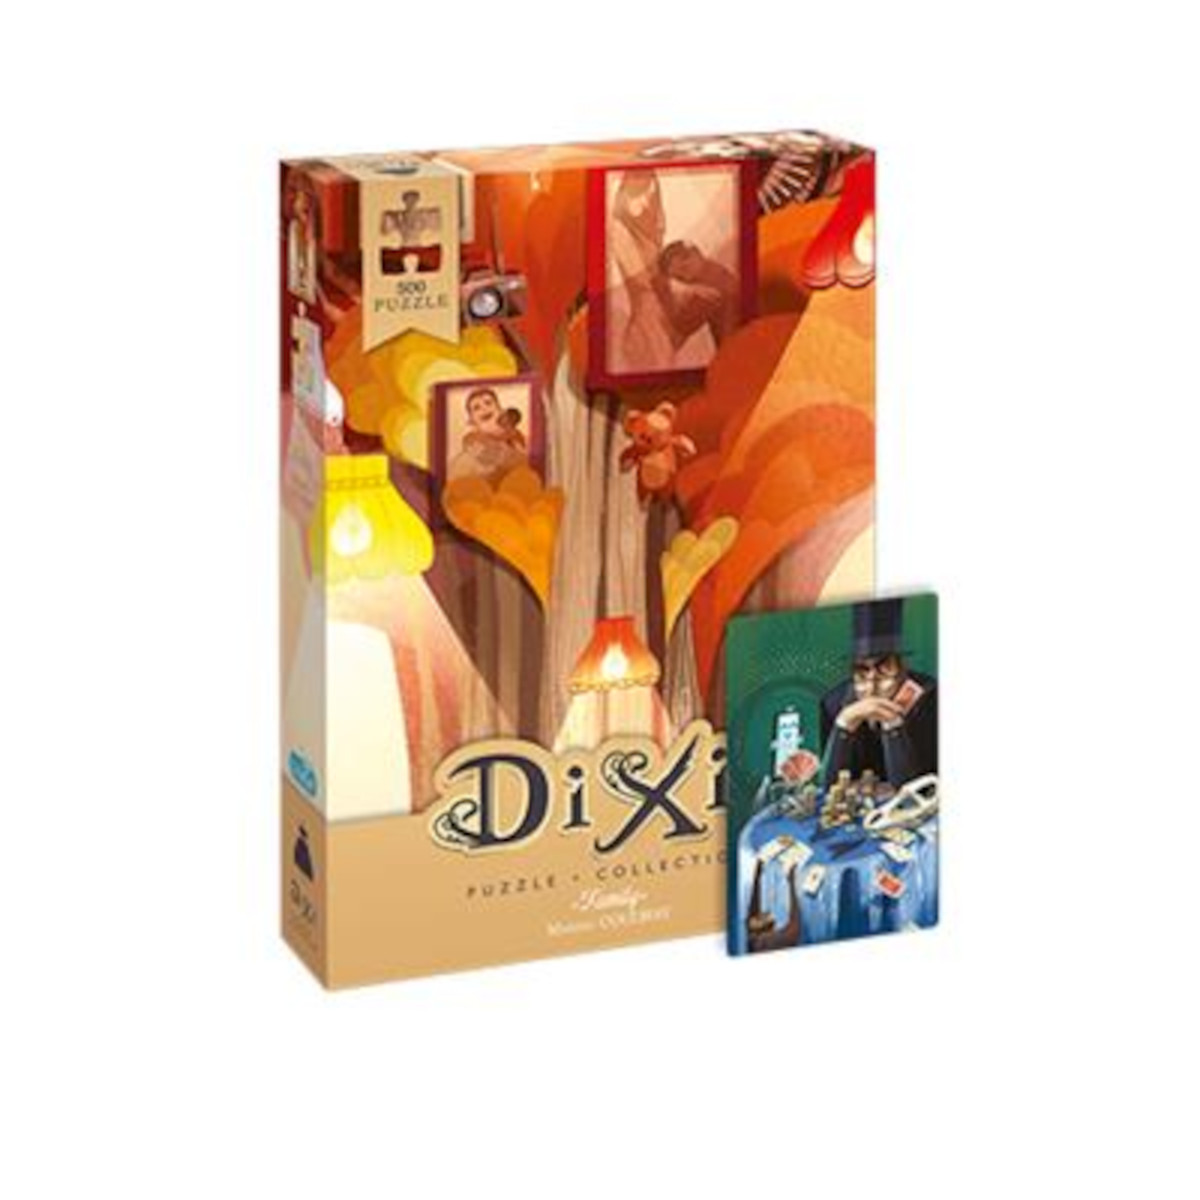 Family - Puzzle Dixit 500 Pezzi - Asmodee